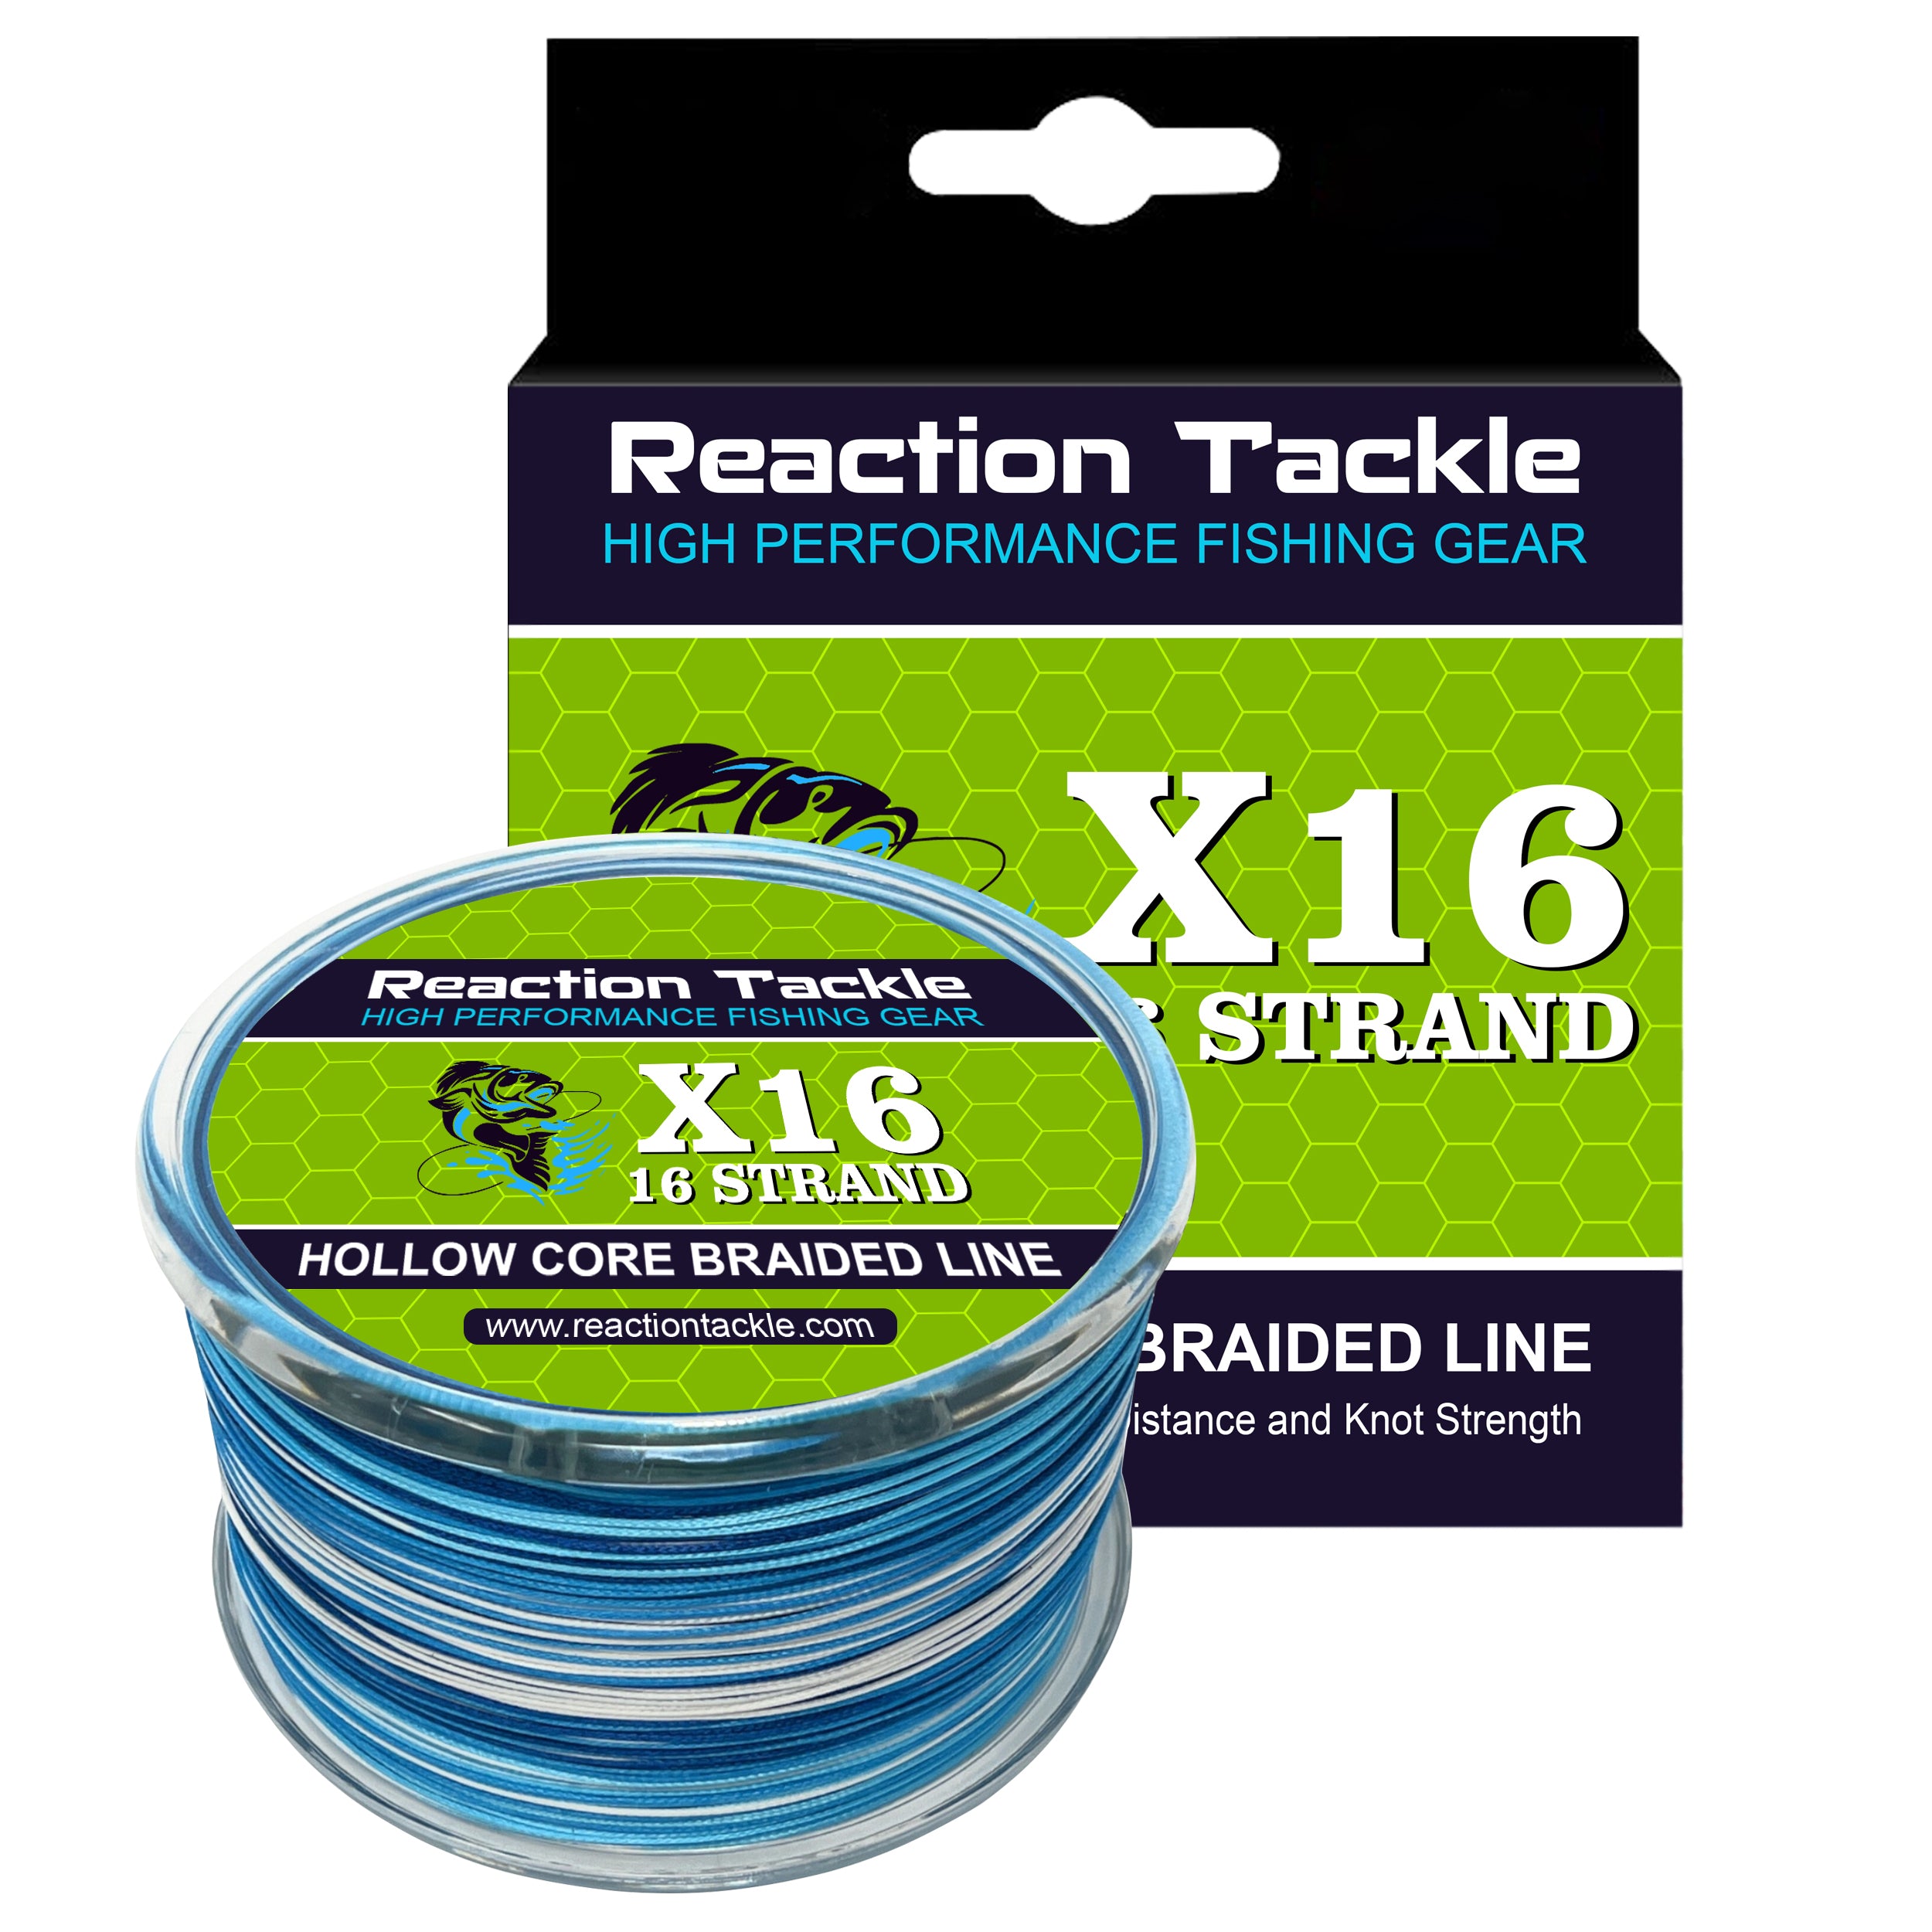 Play Action One Shot Hollow Core Braid - 130lb - 3000yd - TackleDirect